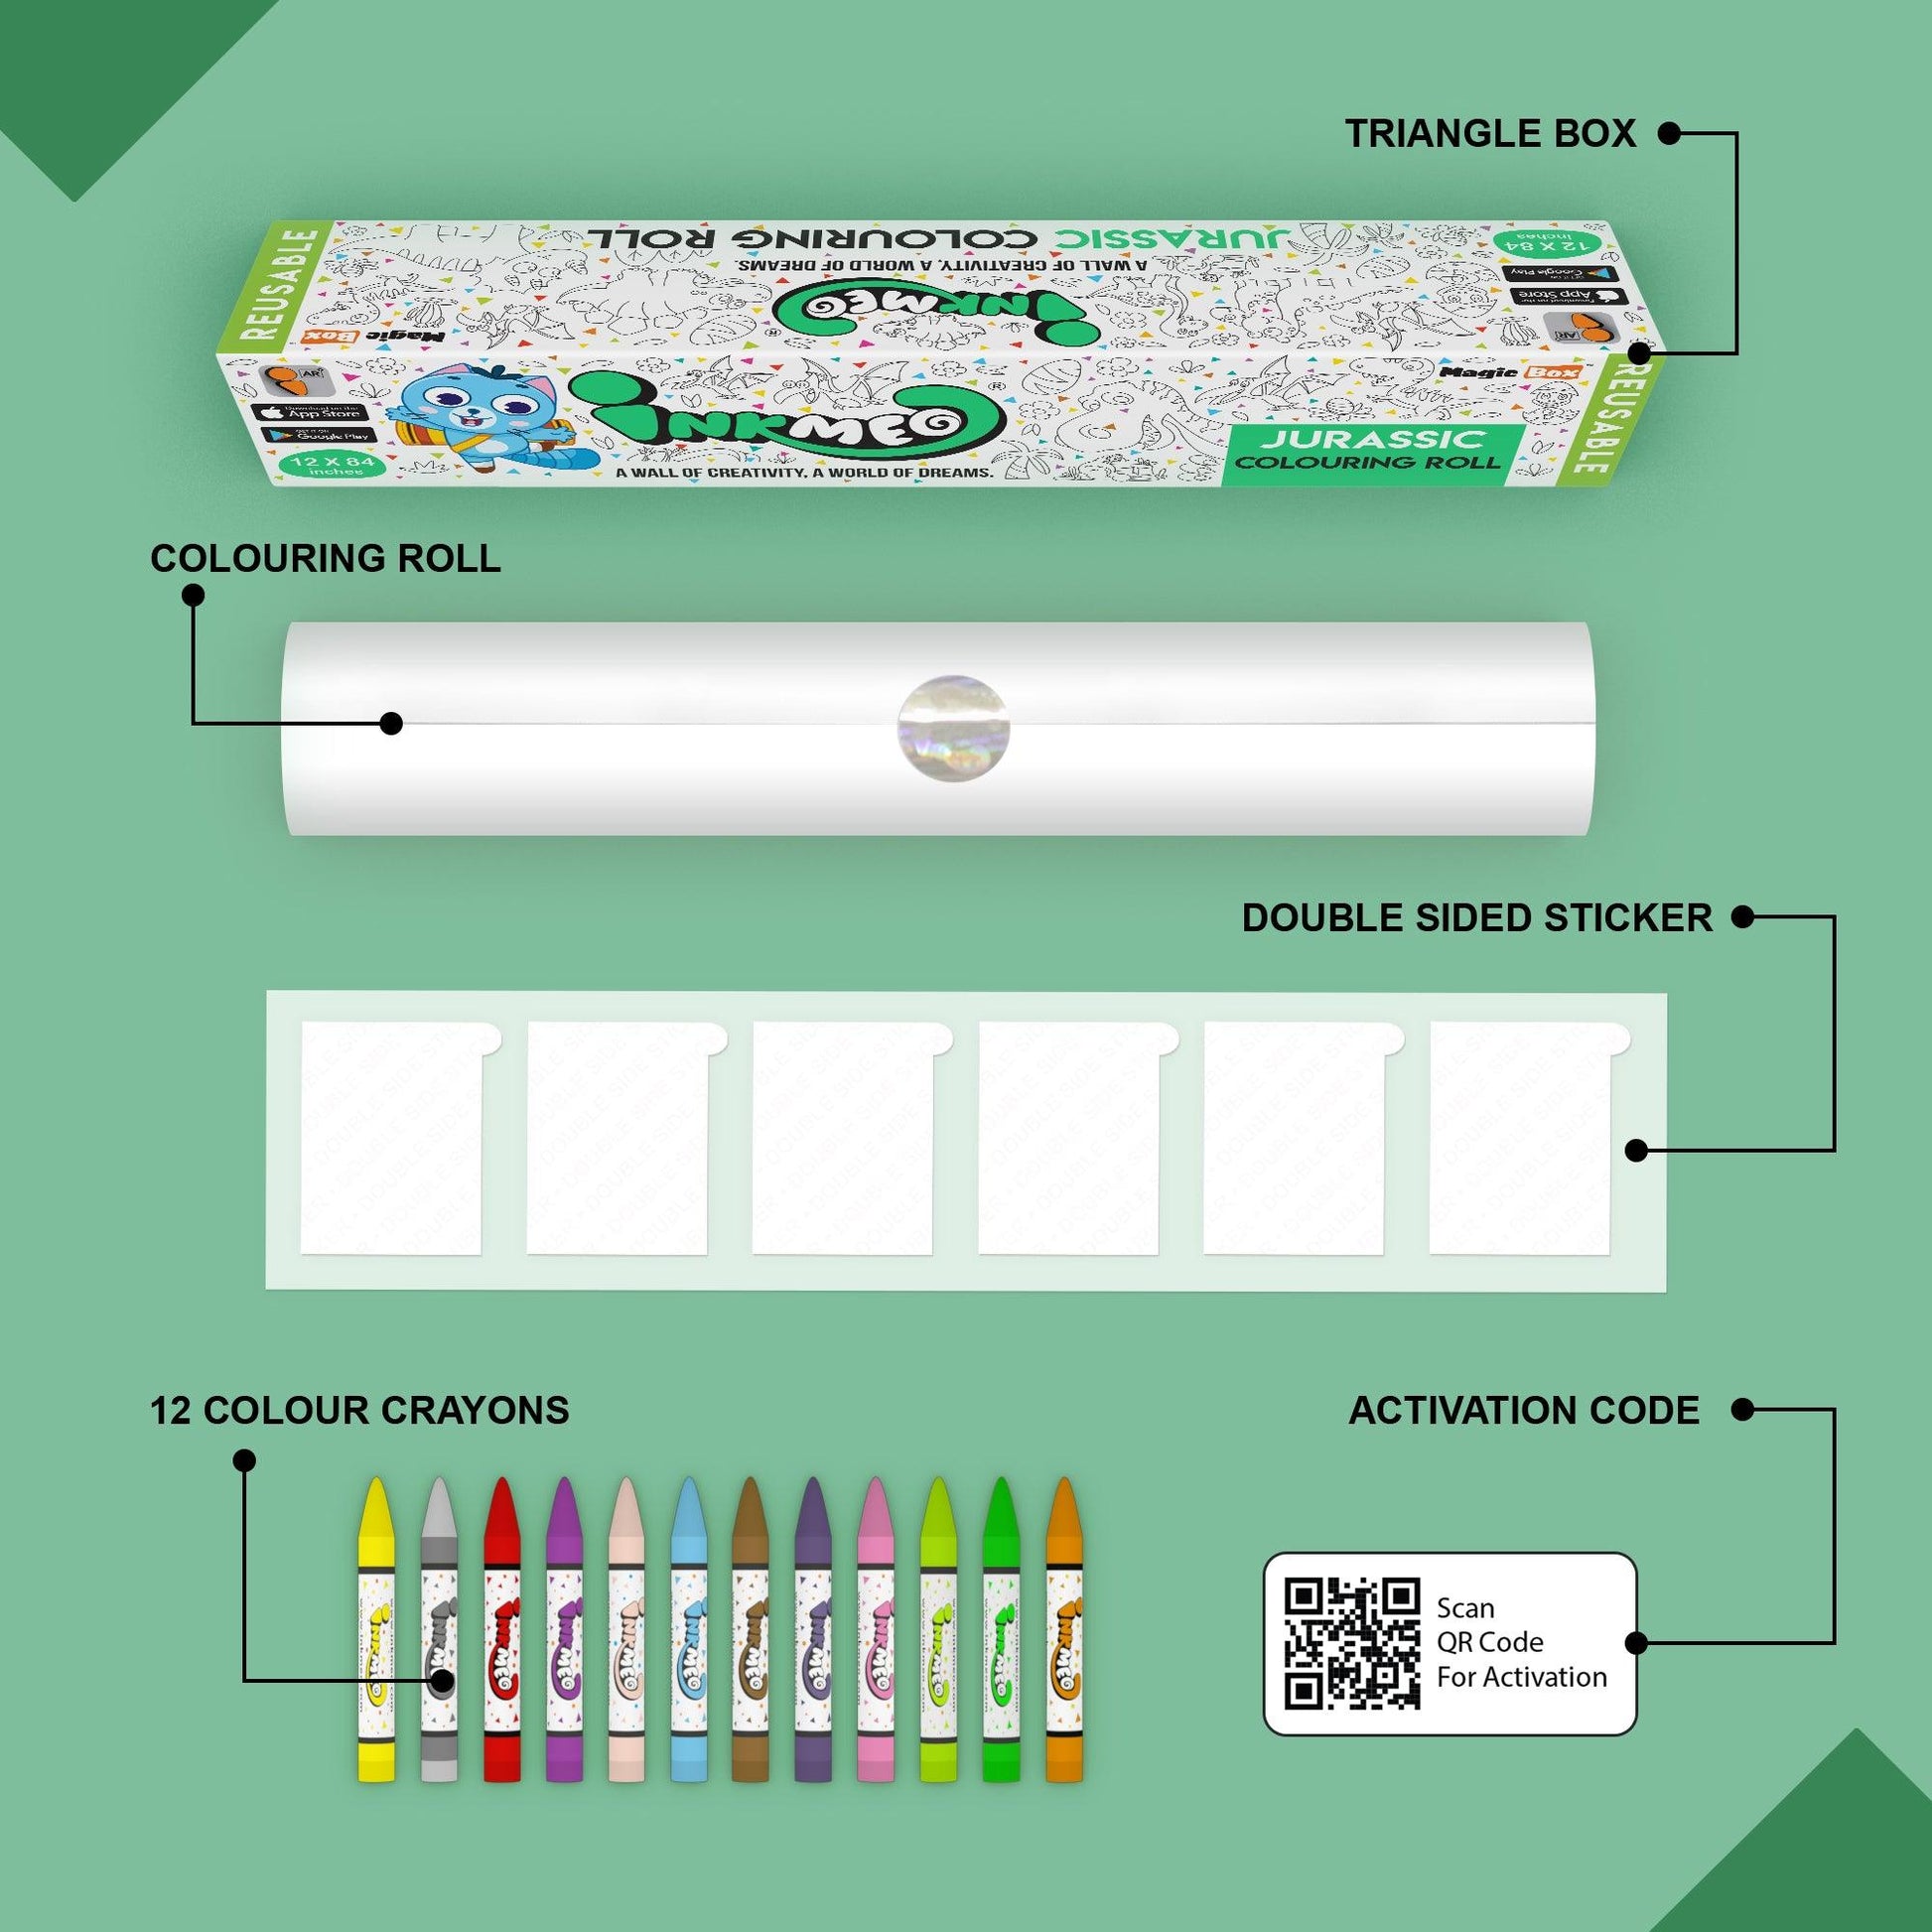 The image depicts a green background with a single triangular box, a coloring roll, 6 double-sided stickers, 12 colored crayons, and an activation code.